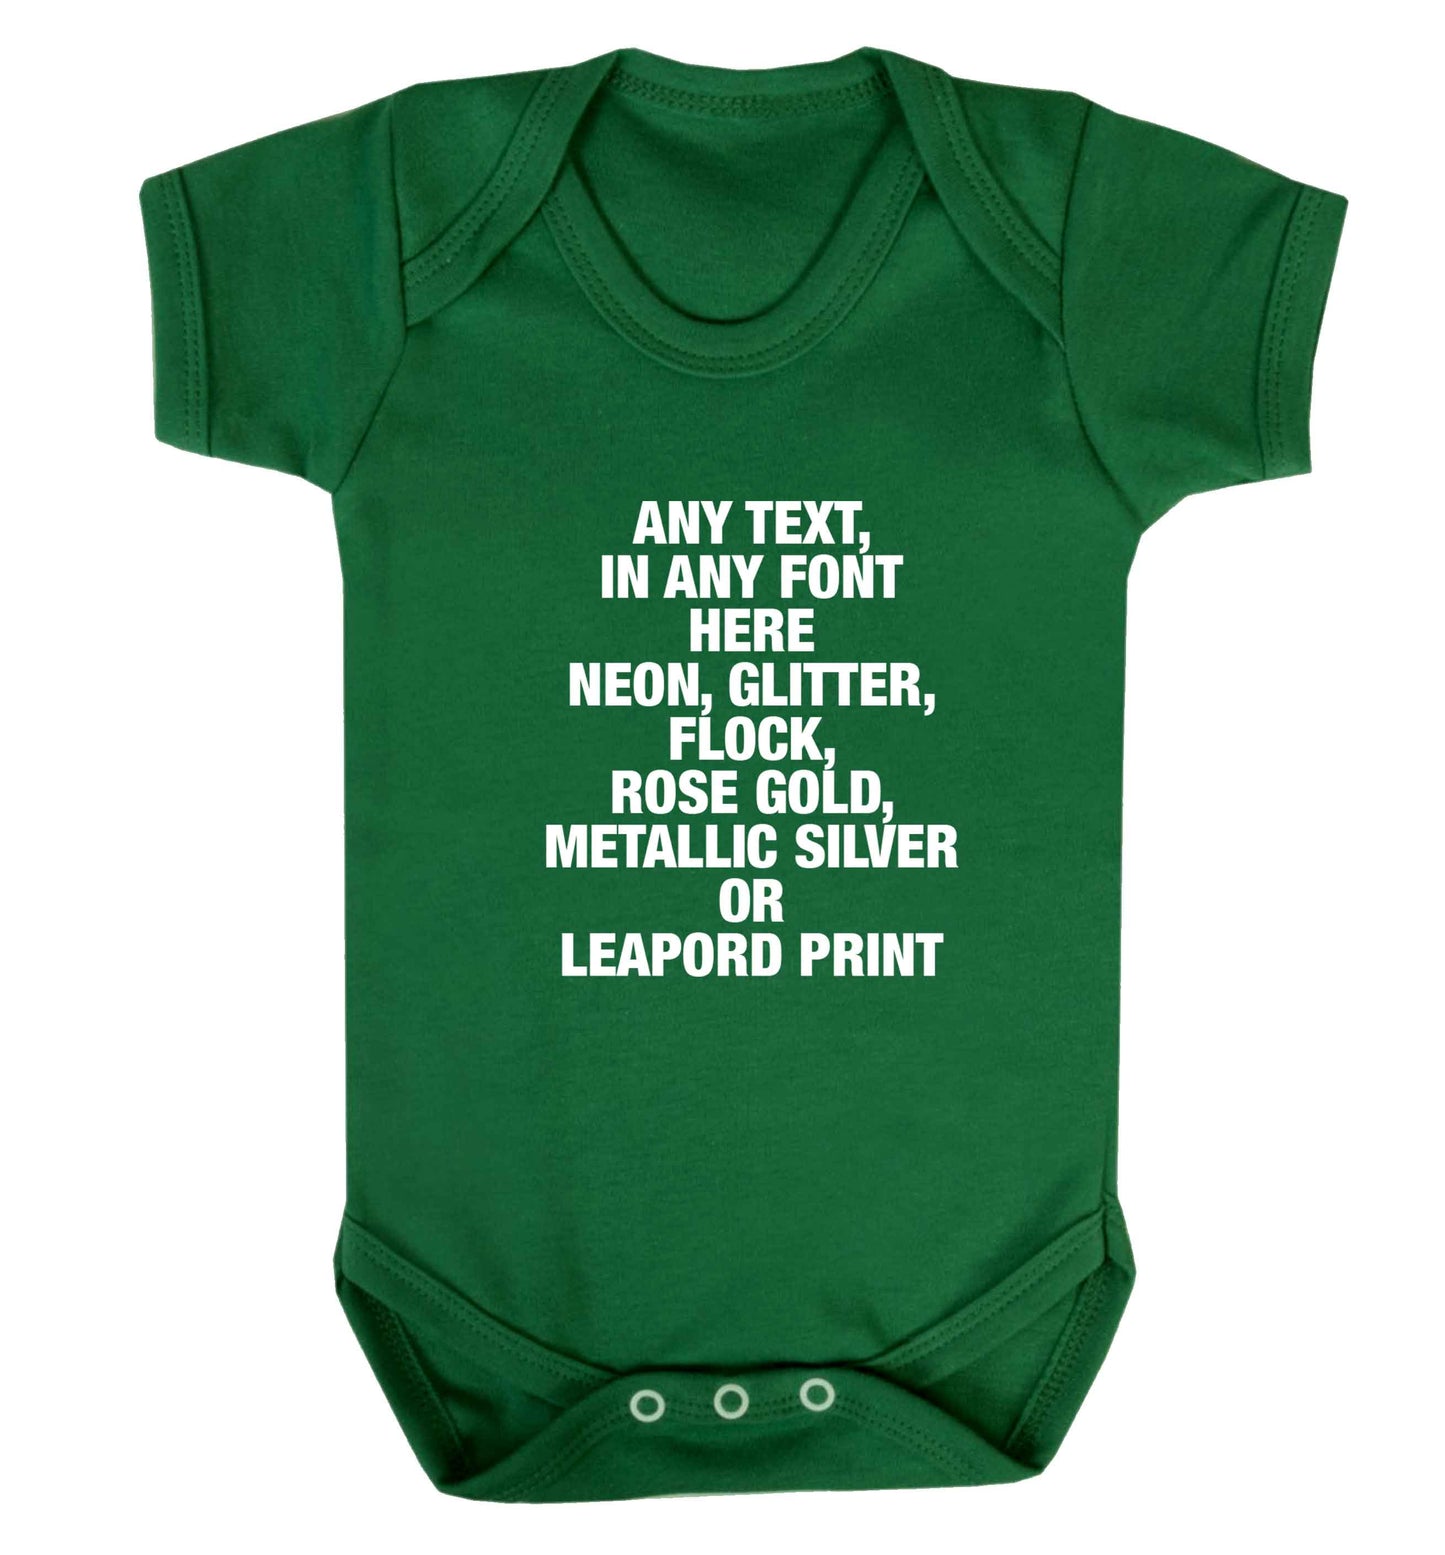 Premium custom order any text colour and font baby vest green 18-24 months